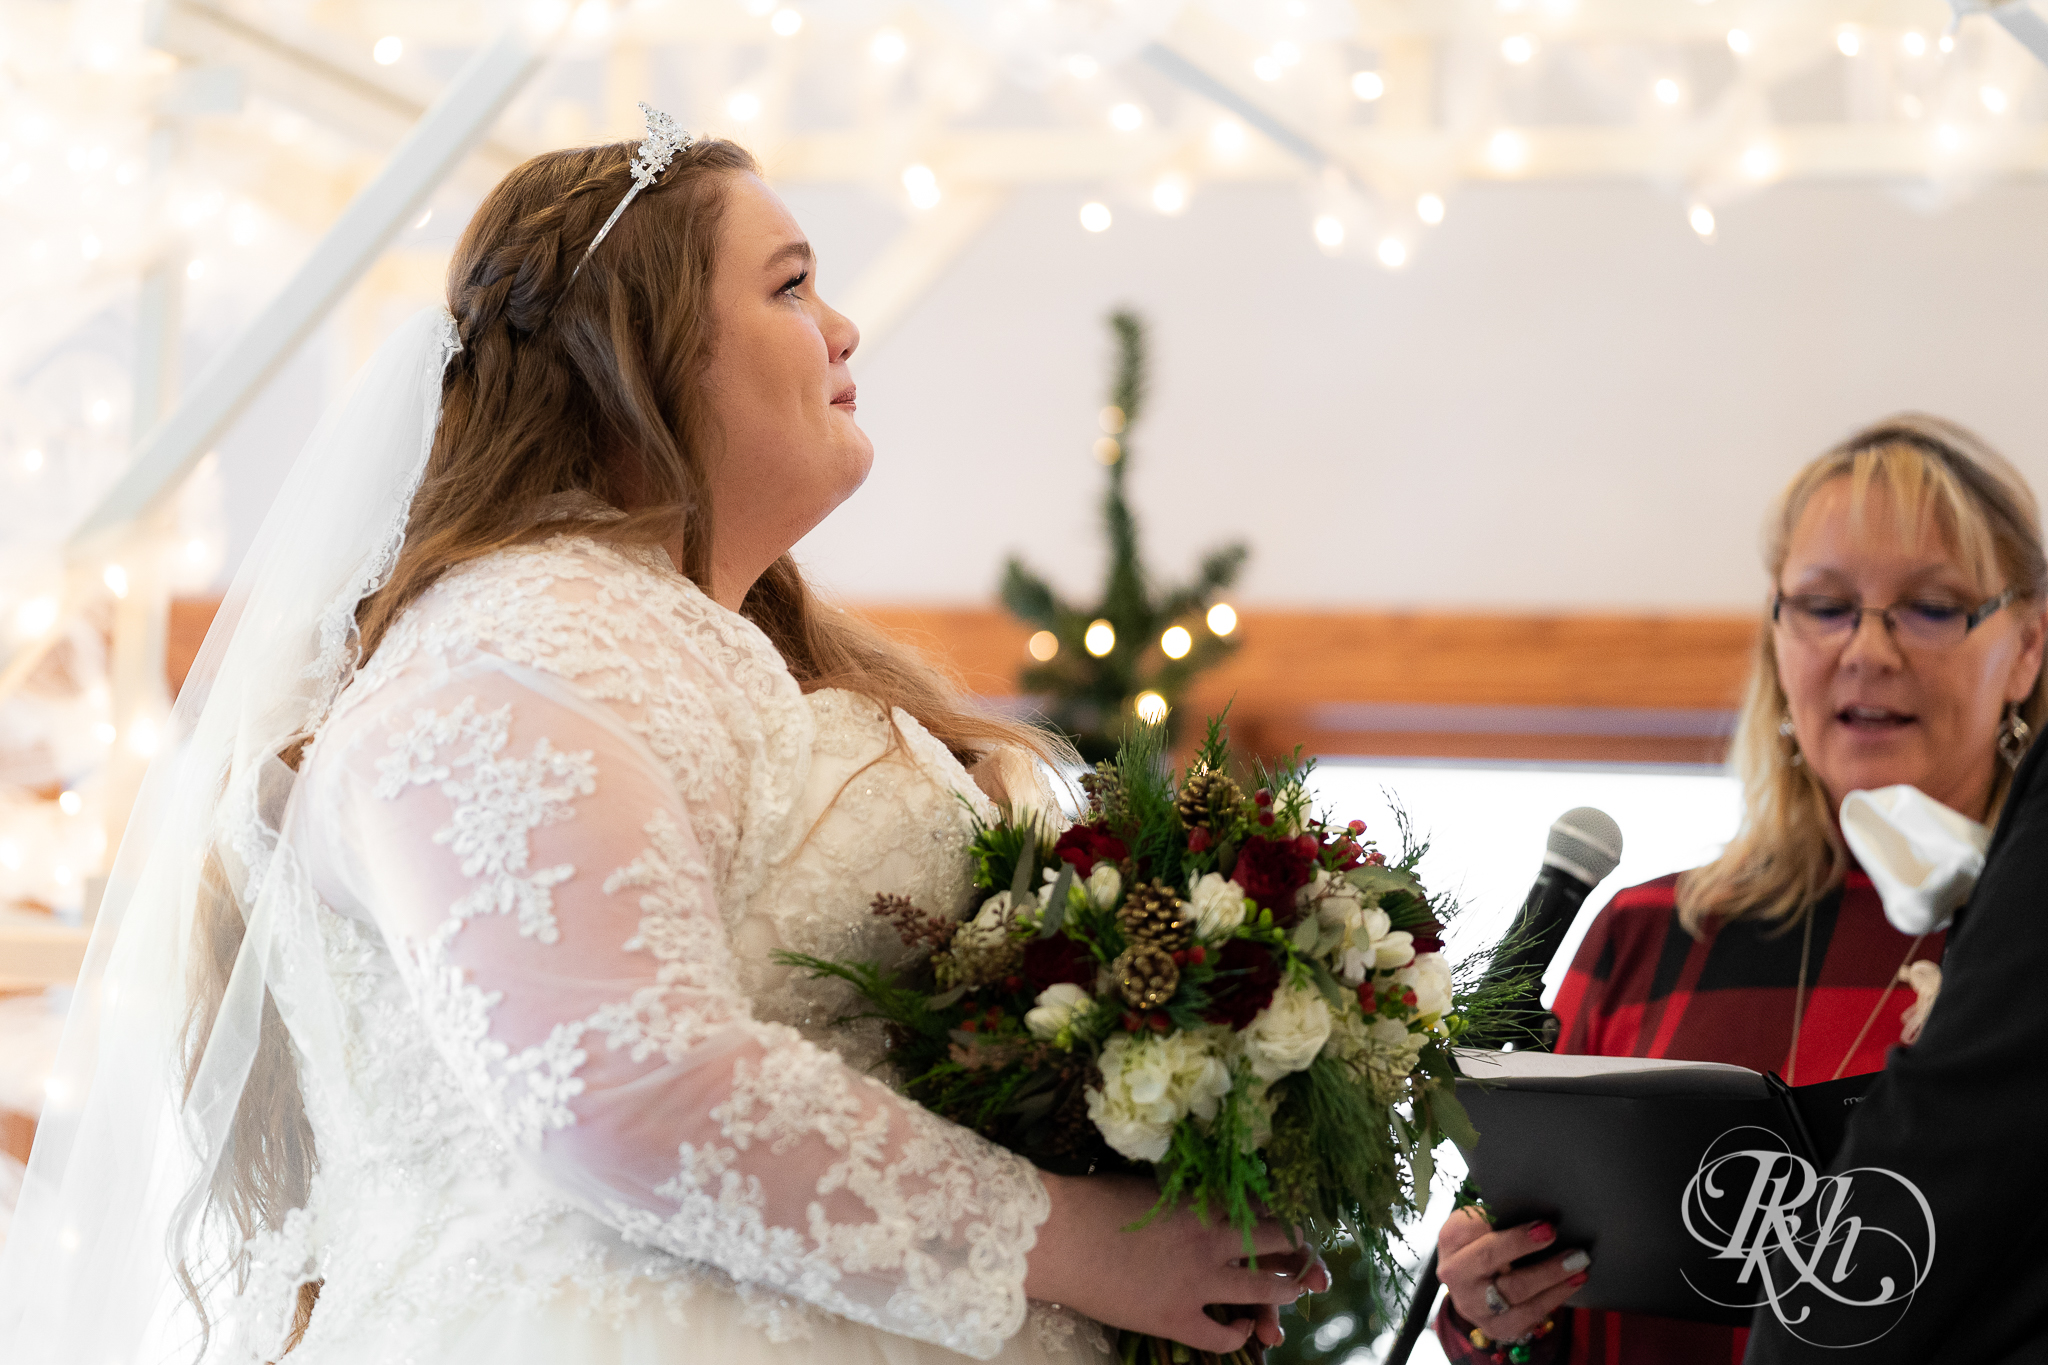 Bride crying at ceremony at Christmas wedding at Oak Glen Golf Course in Stillwater, Minnesota.